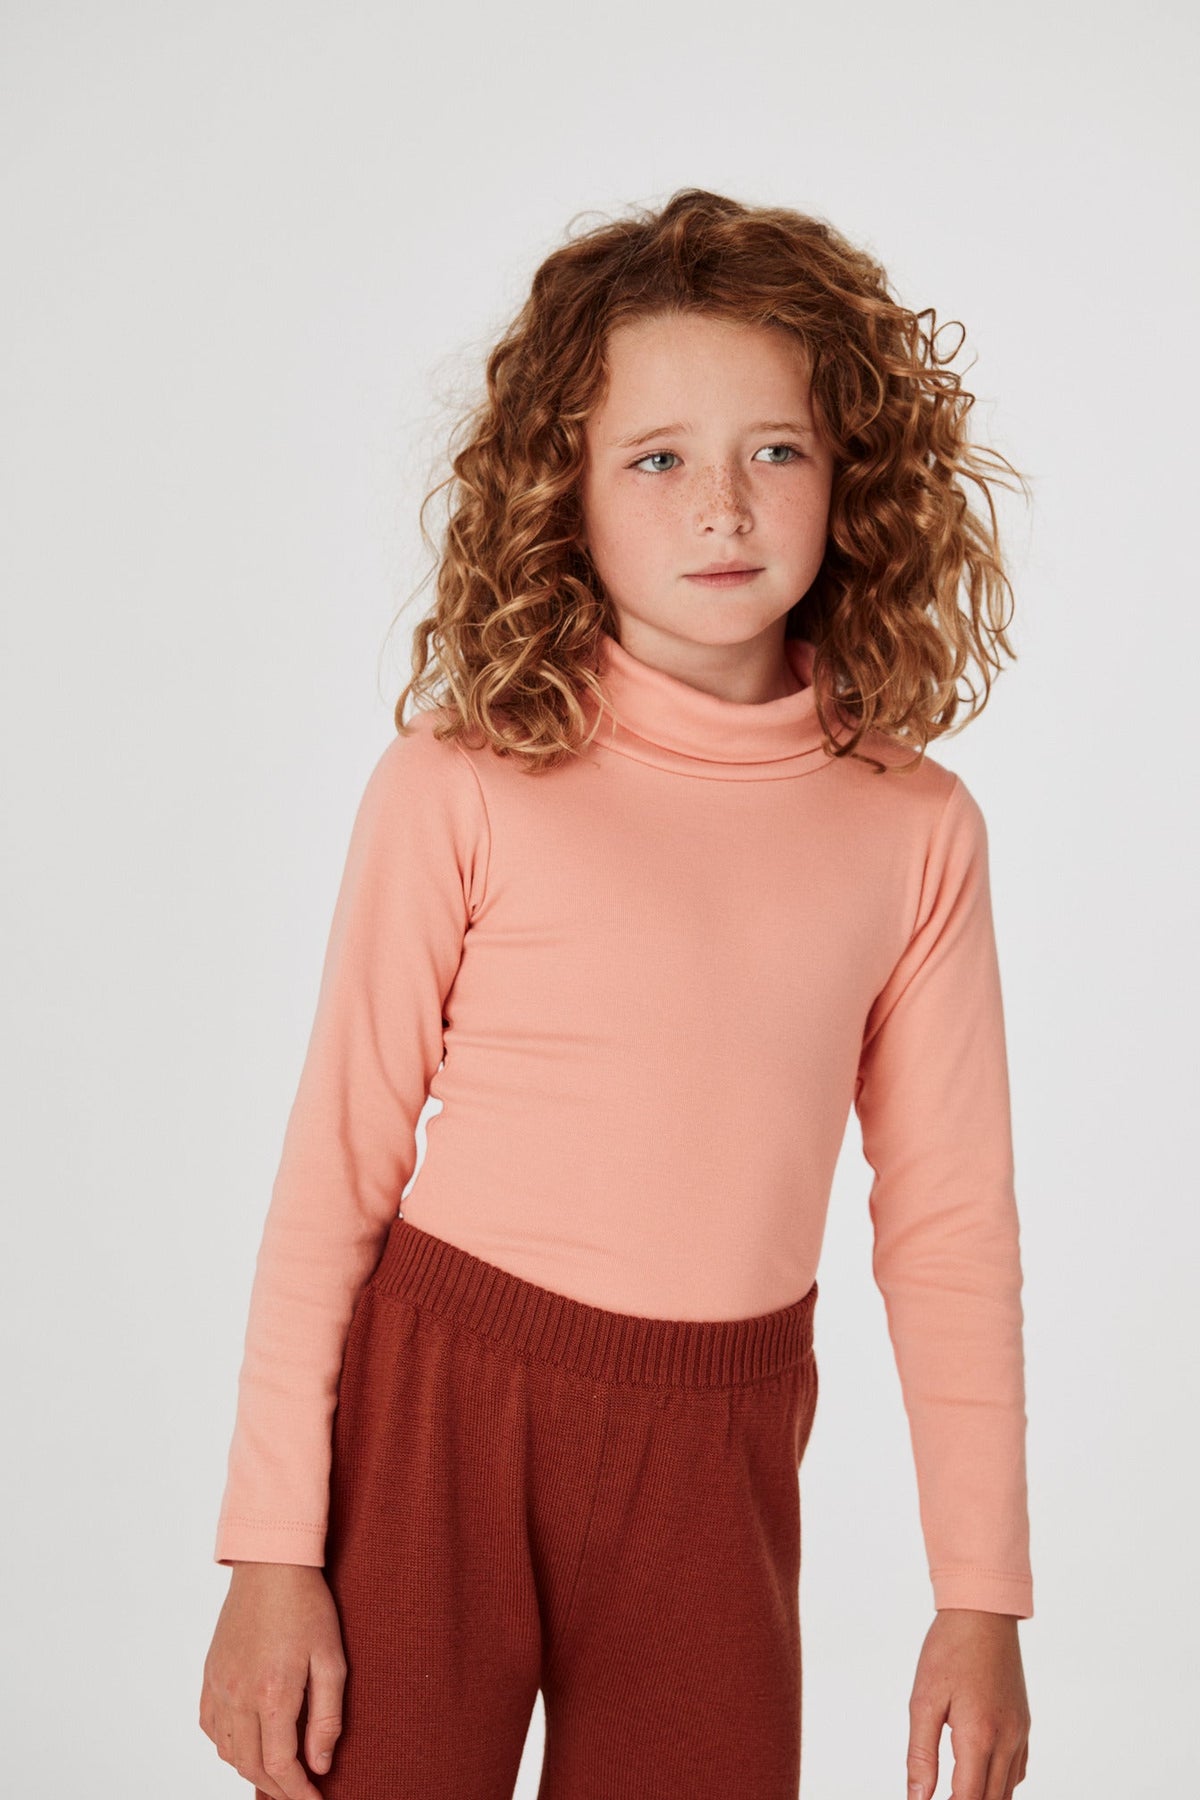 Turtleneck - Grapefruit+Model is 48 inches tall, 48lbs, wearing a size 6-7y